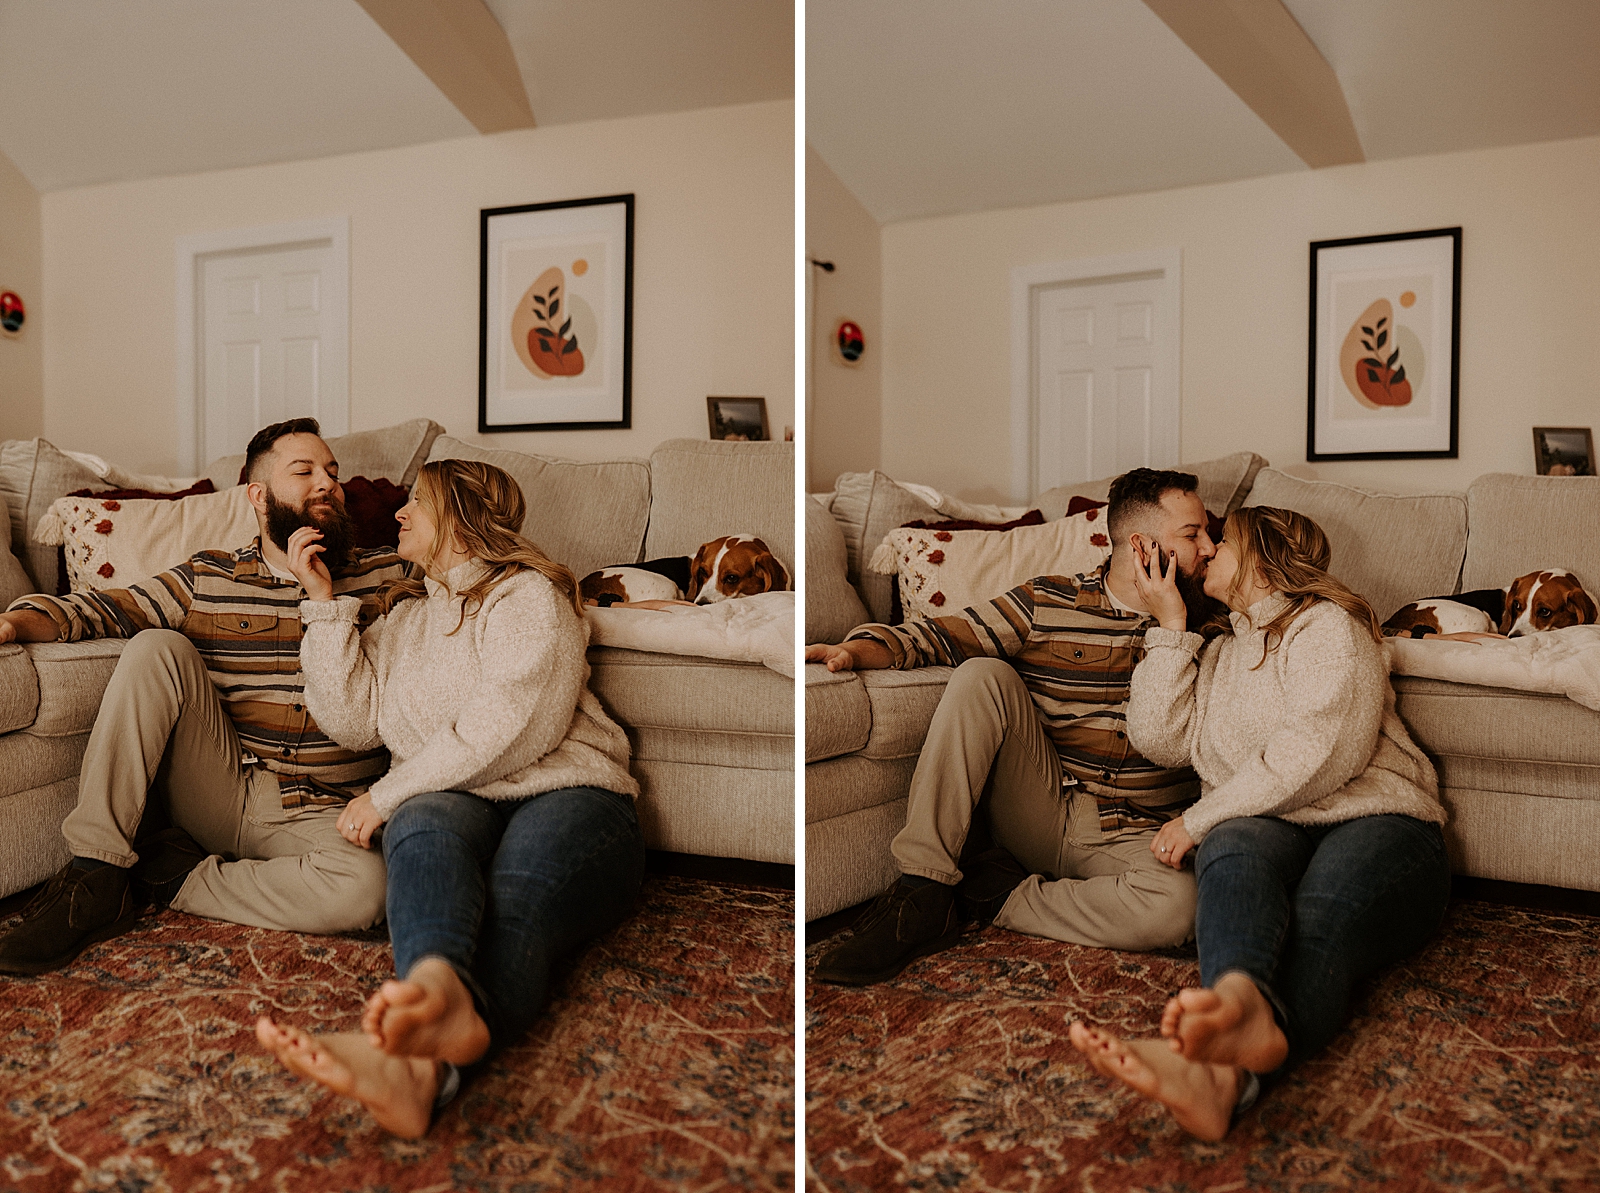 Woman playing with man's beard and kissing while sitting on caroet against couch